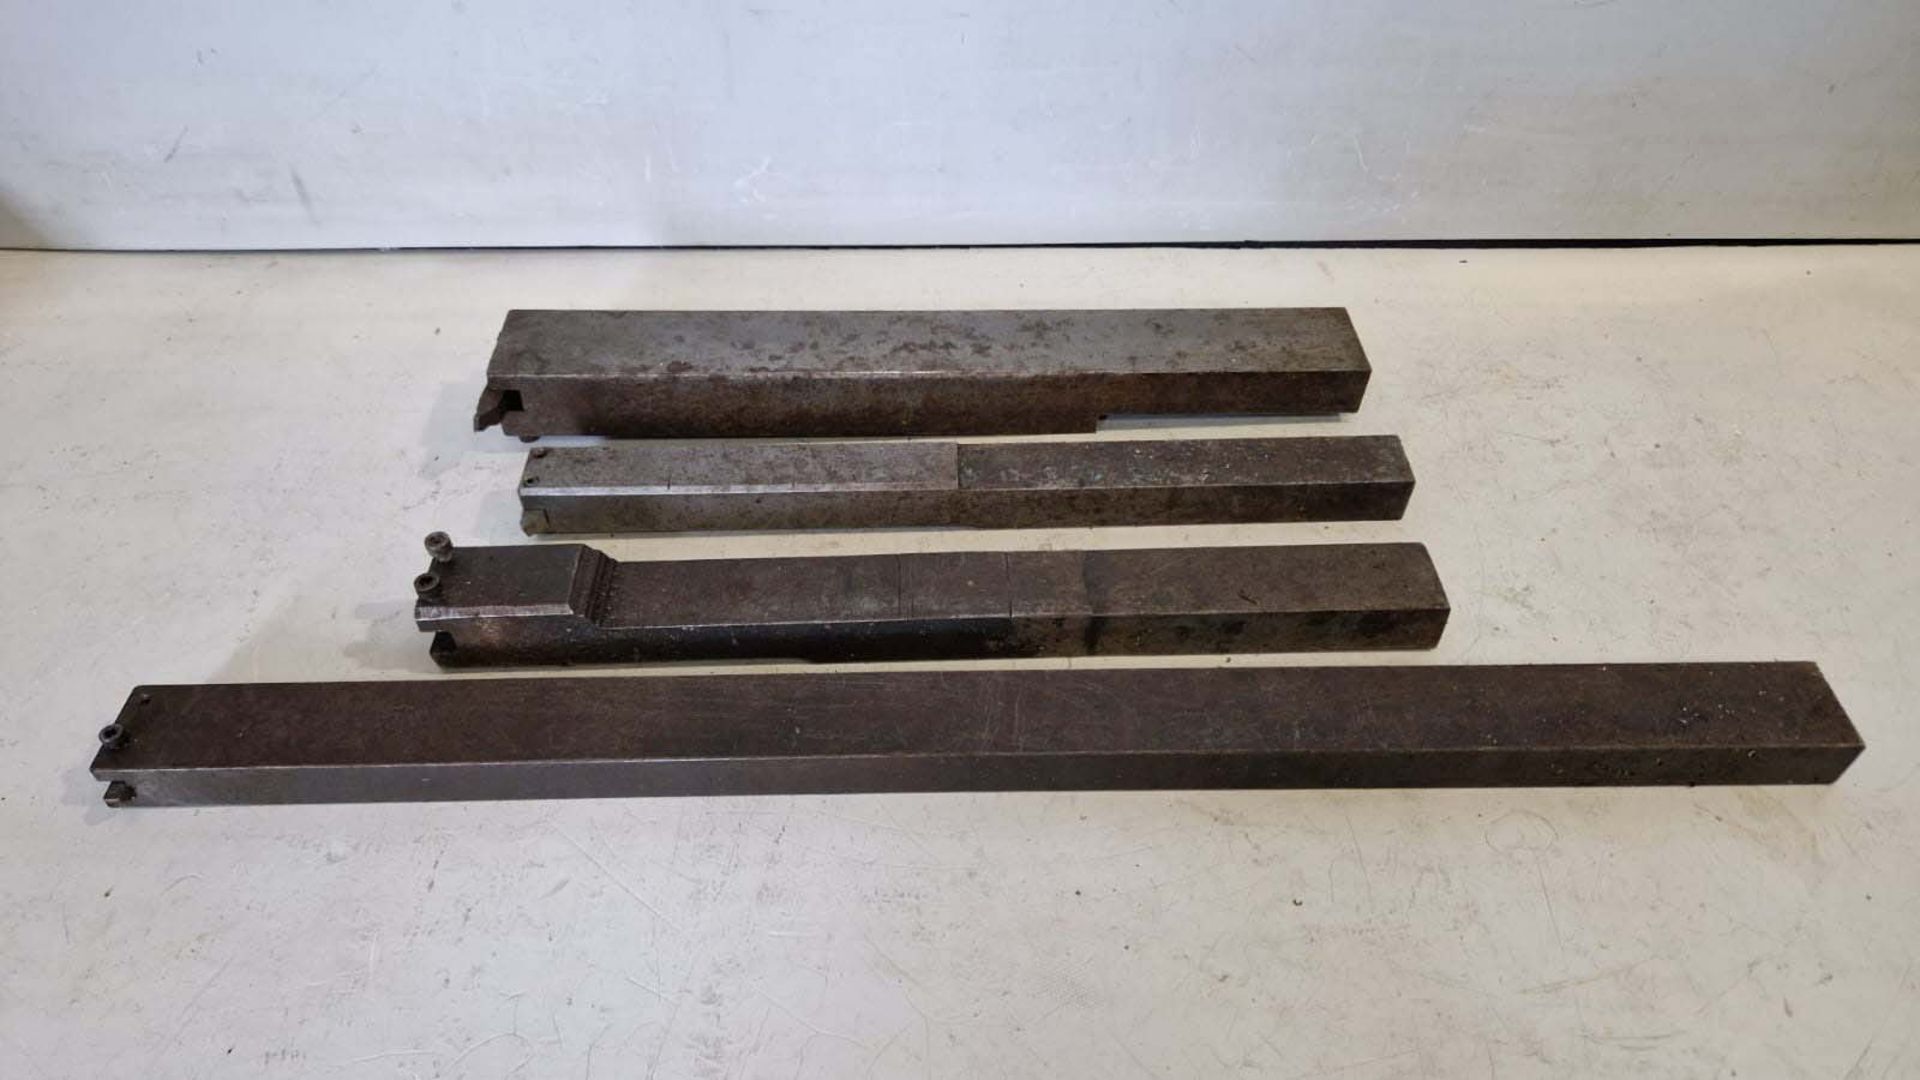 4 x Home Made Heavy Duty Lathe Boring Bars. Lengths from 400mm to 650mm.